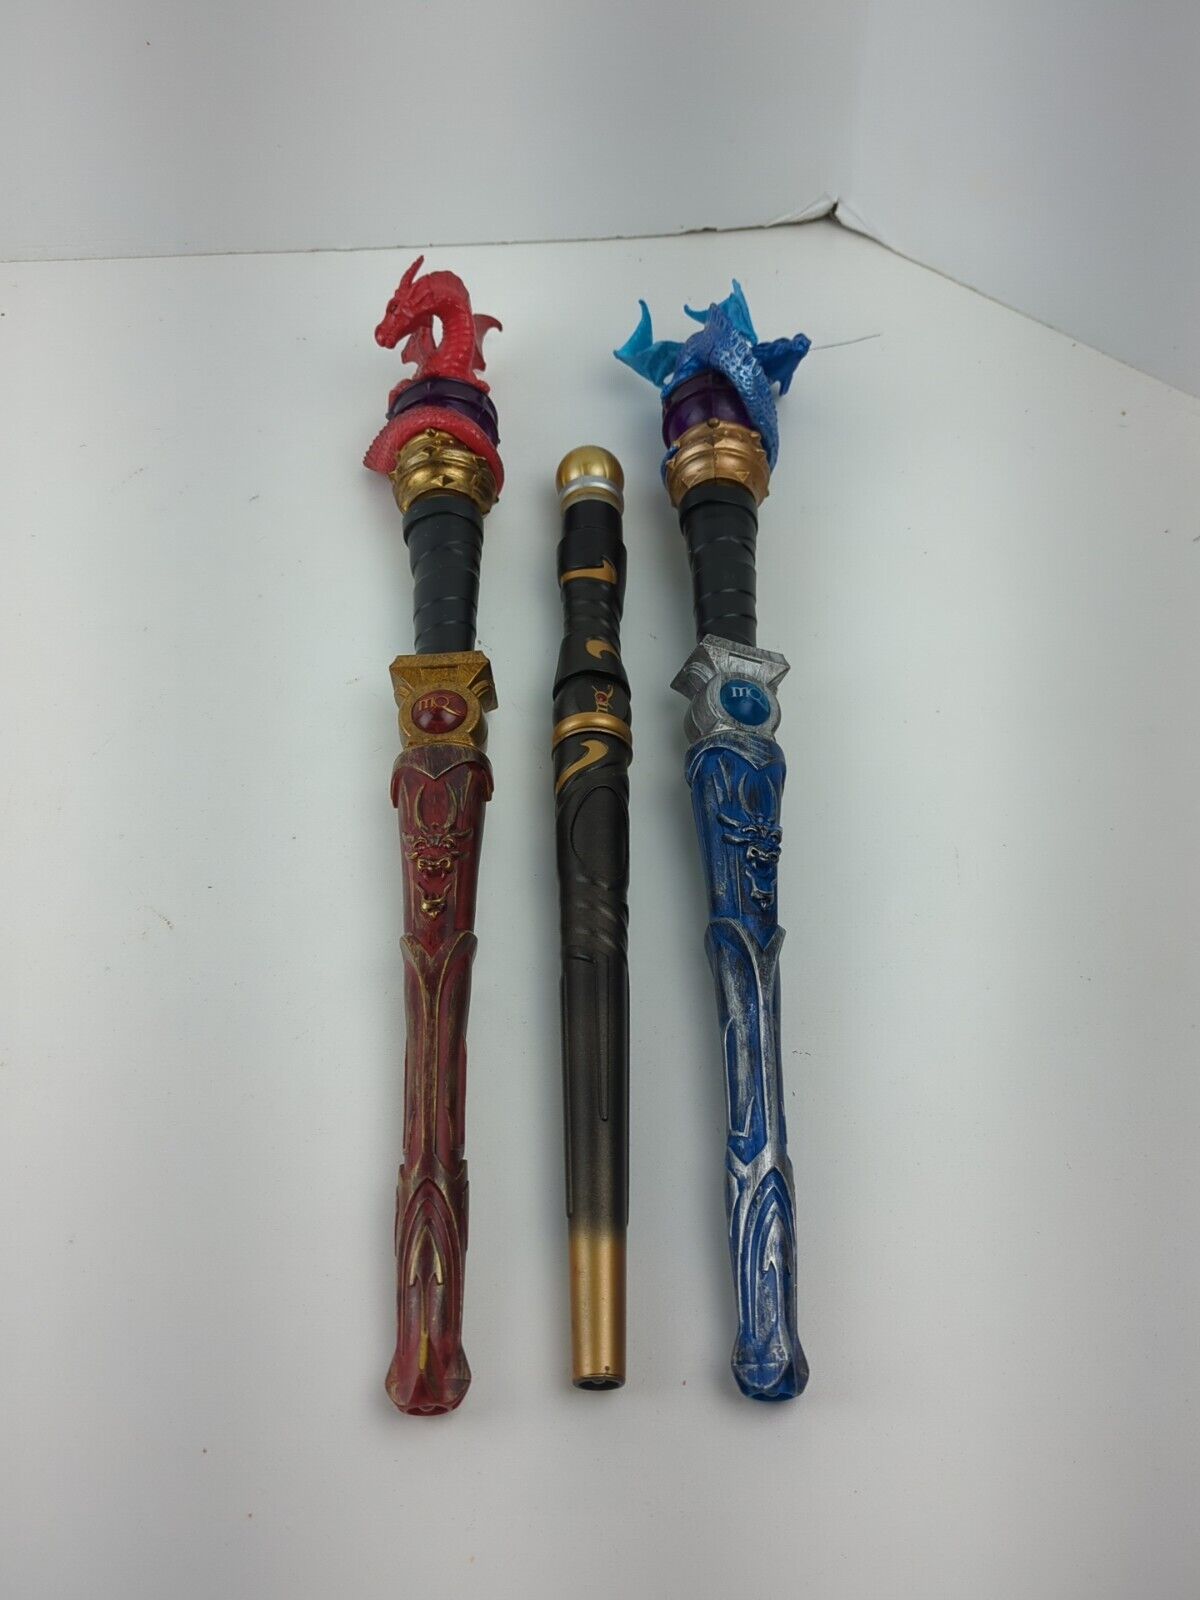 Magiquest Great Wolf Lodge Wands Lot of 3 With 2 Dragon Topper Wizards & Witches